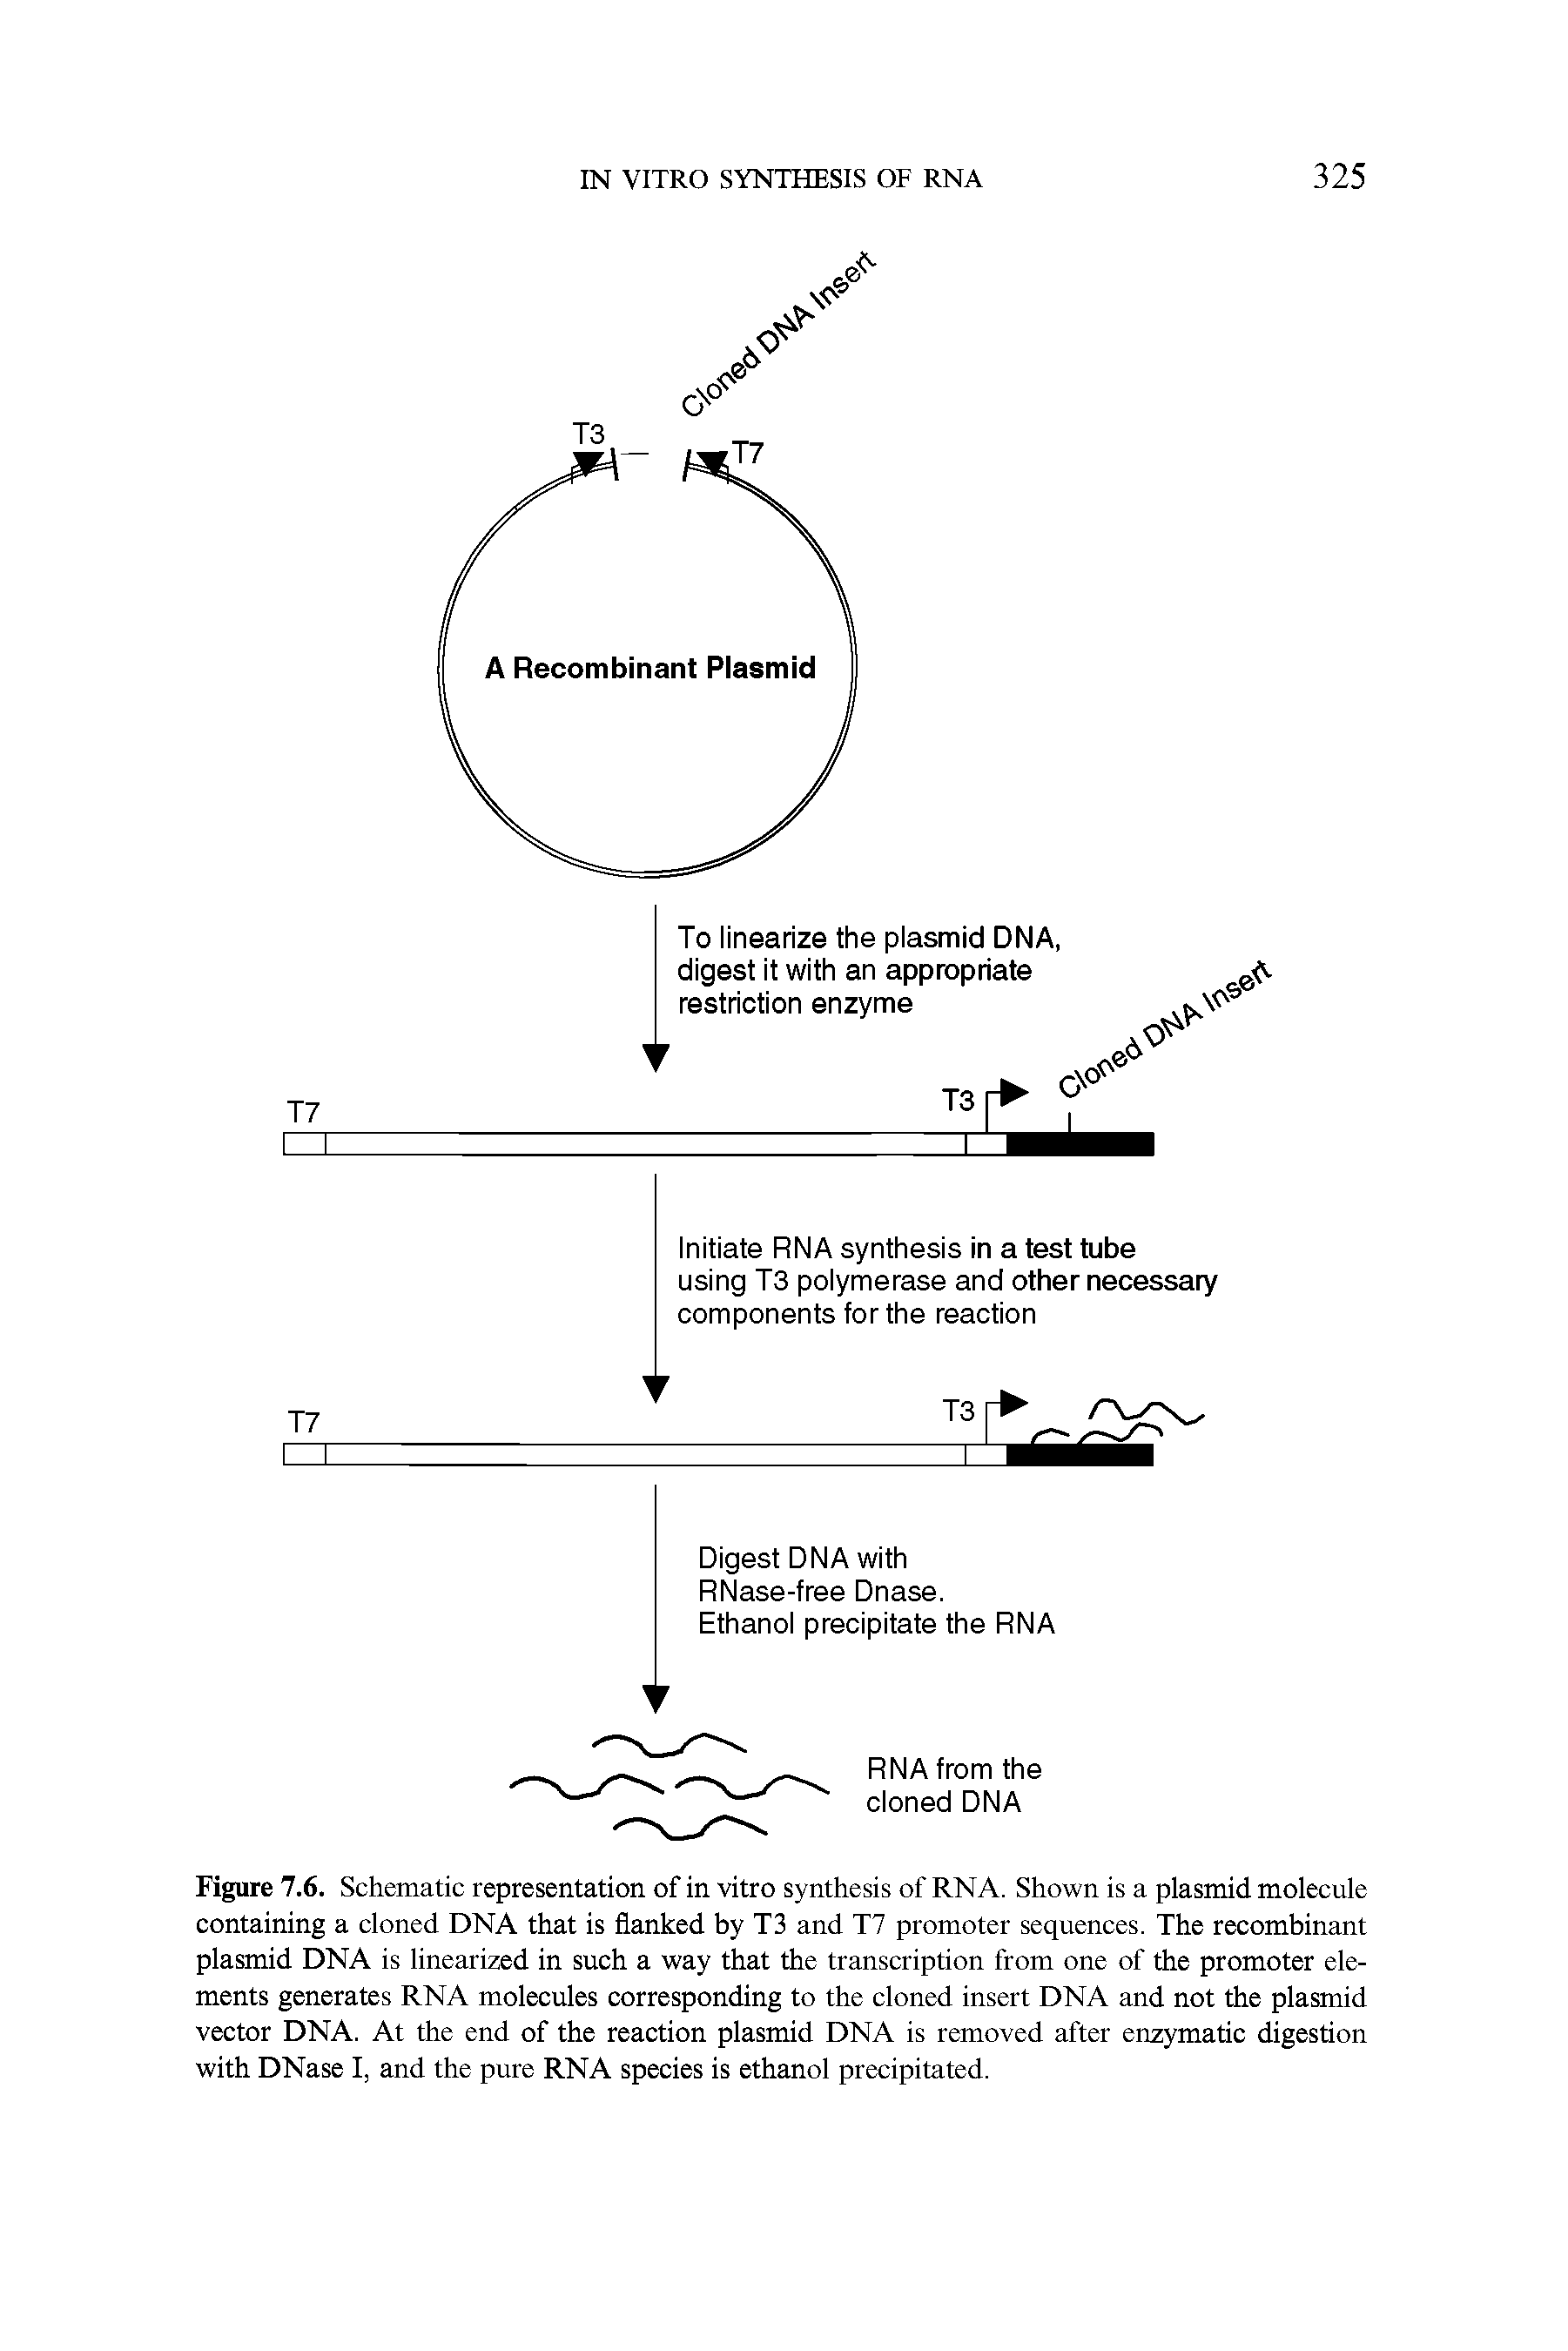 Figure 7.6. Schematic representation of in vitro synthesis of RNA. Shown is a plasmid molecule containing a cloned DNA that is flanked by T3 and T7 promoter sequences. The recombinant plasmid DNA is linearized in such a way that the transcription from one of the promoter elements generates RNA molecules corresponding to the cloned insert DNA and not the plasmid vector DNA. At the end of the reaction plasmid DNA is removed after enzymatic digestion with DNase I, and the pure RNA species is ethanol precipitated.